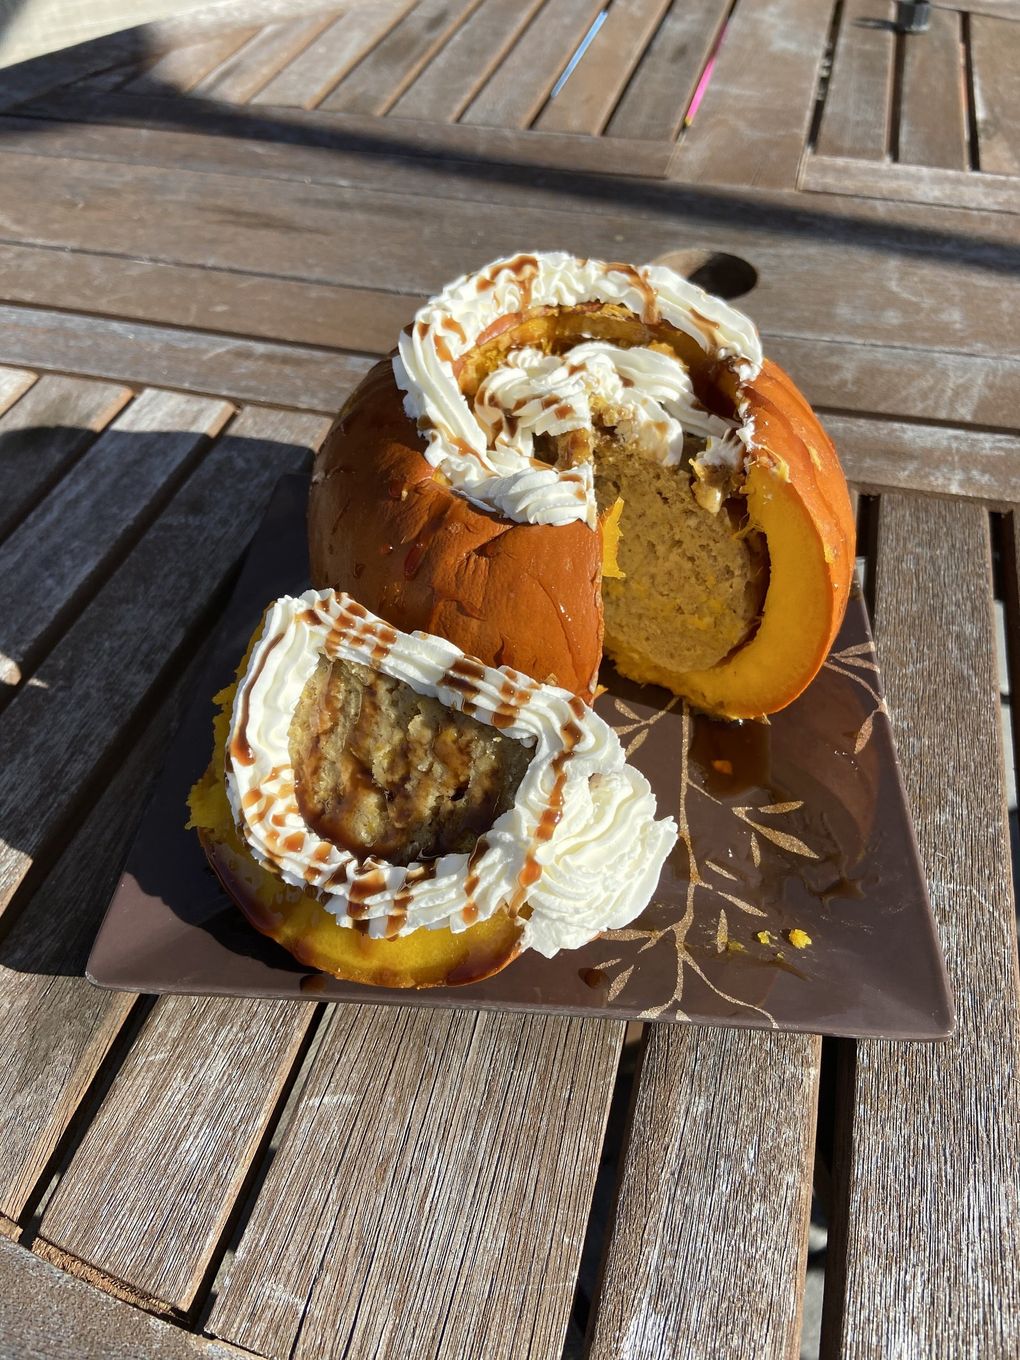 Jeff Abrams made a sweet stuffed pumpkin, figuring out a way to essentially bake a loaf of pumpkin bread within a pumpkin. It was quite the sight to behold.  (Courtesy of Jeff Abrams)